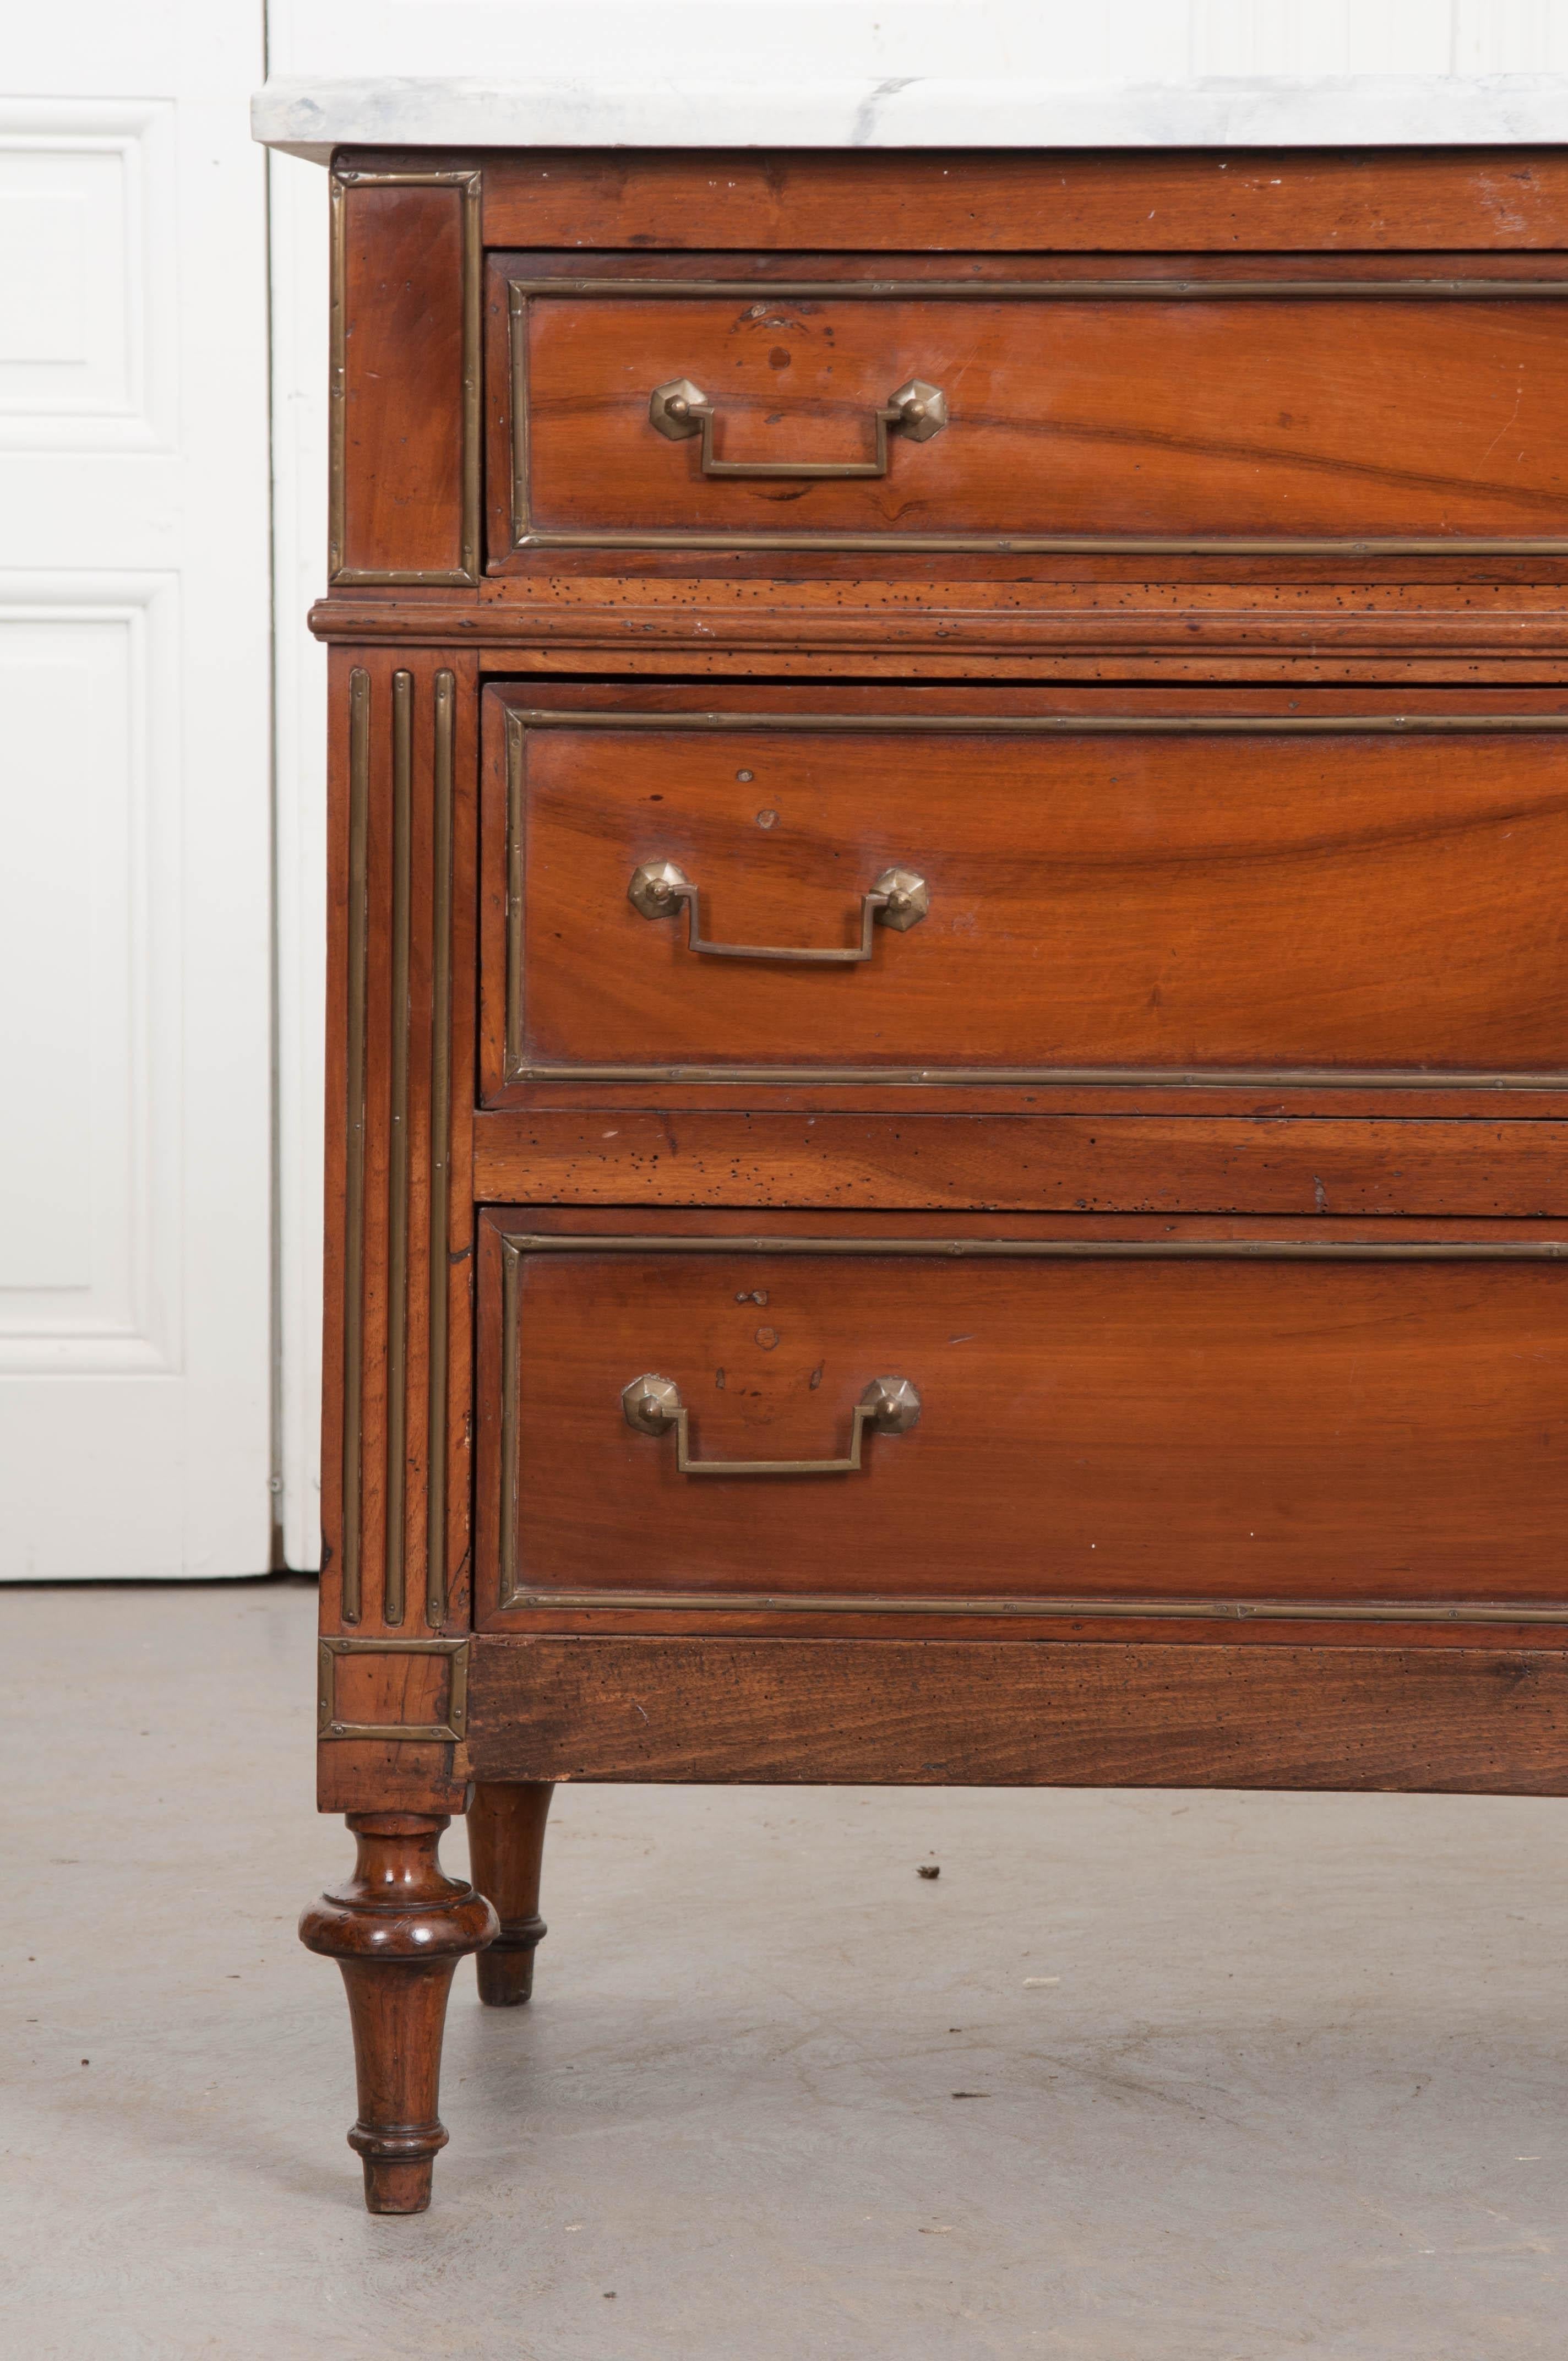 French 19th Century Louis XVI Style Walnut Commode with Faux Marble Top (Louis XVI.)